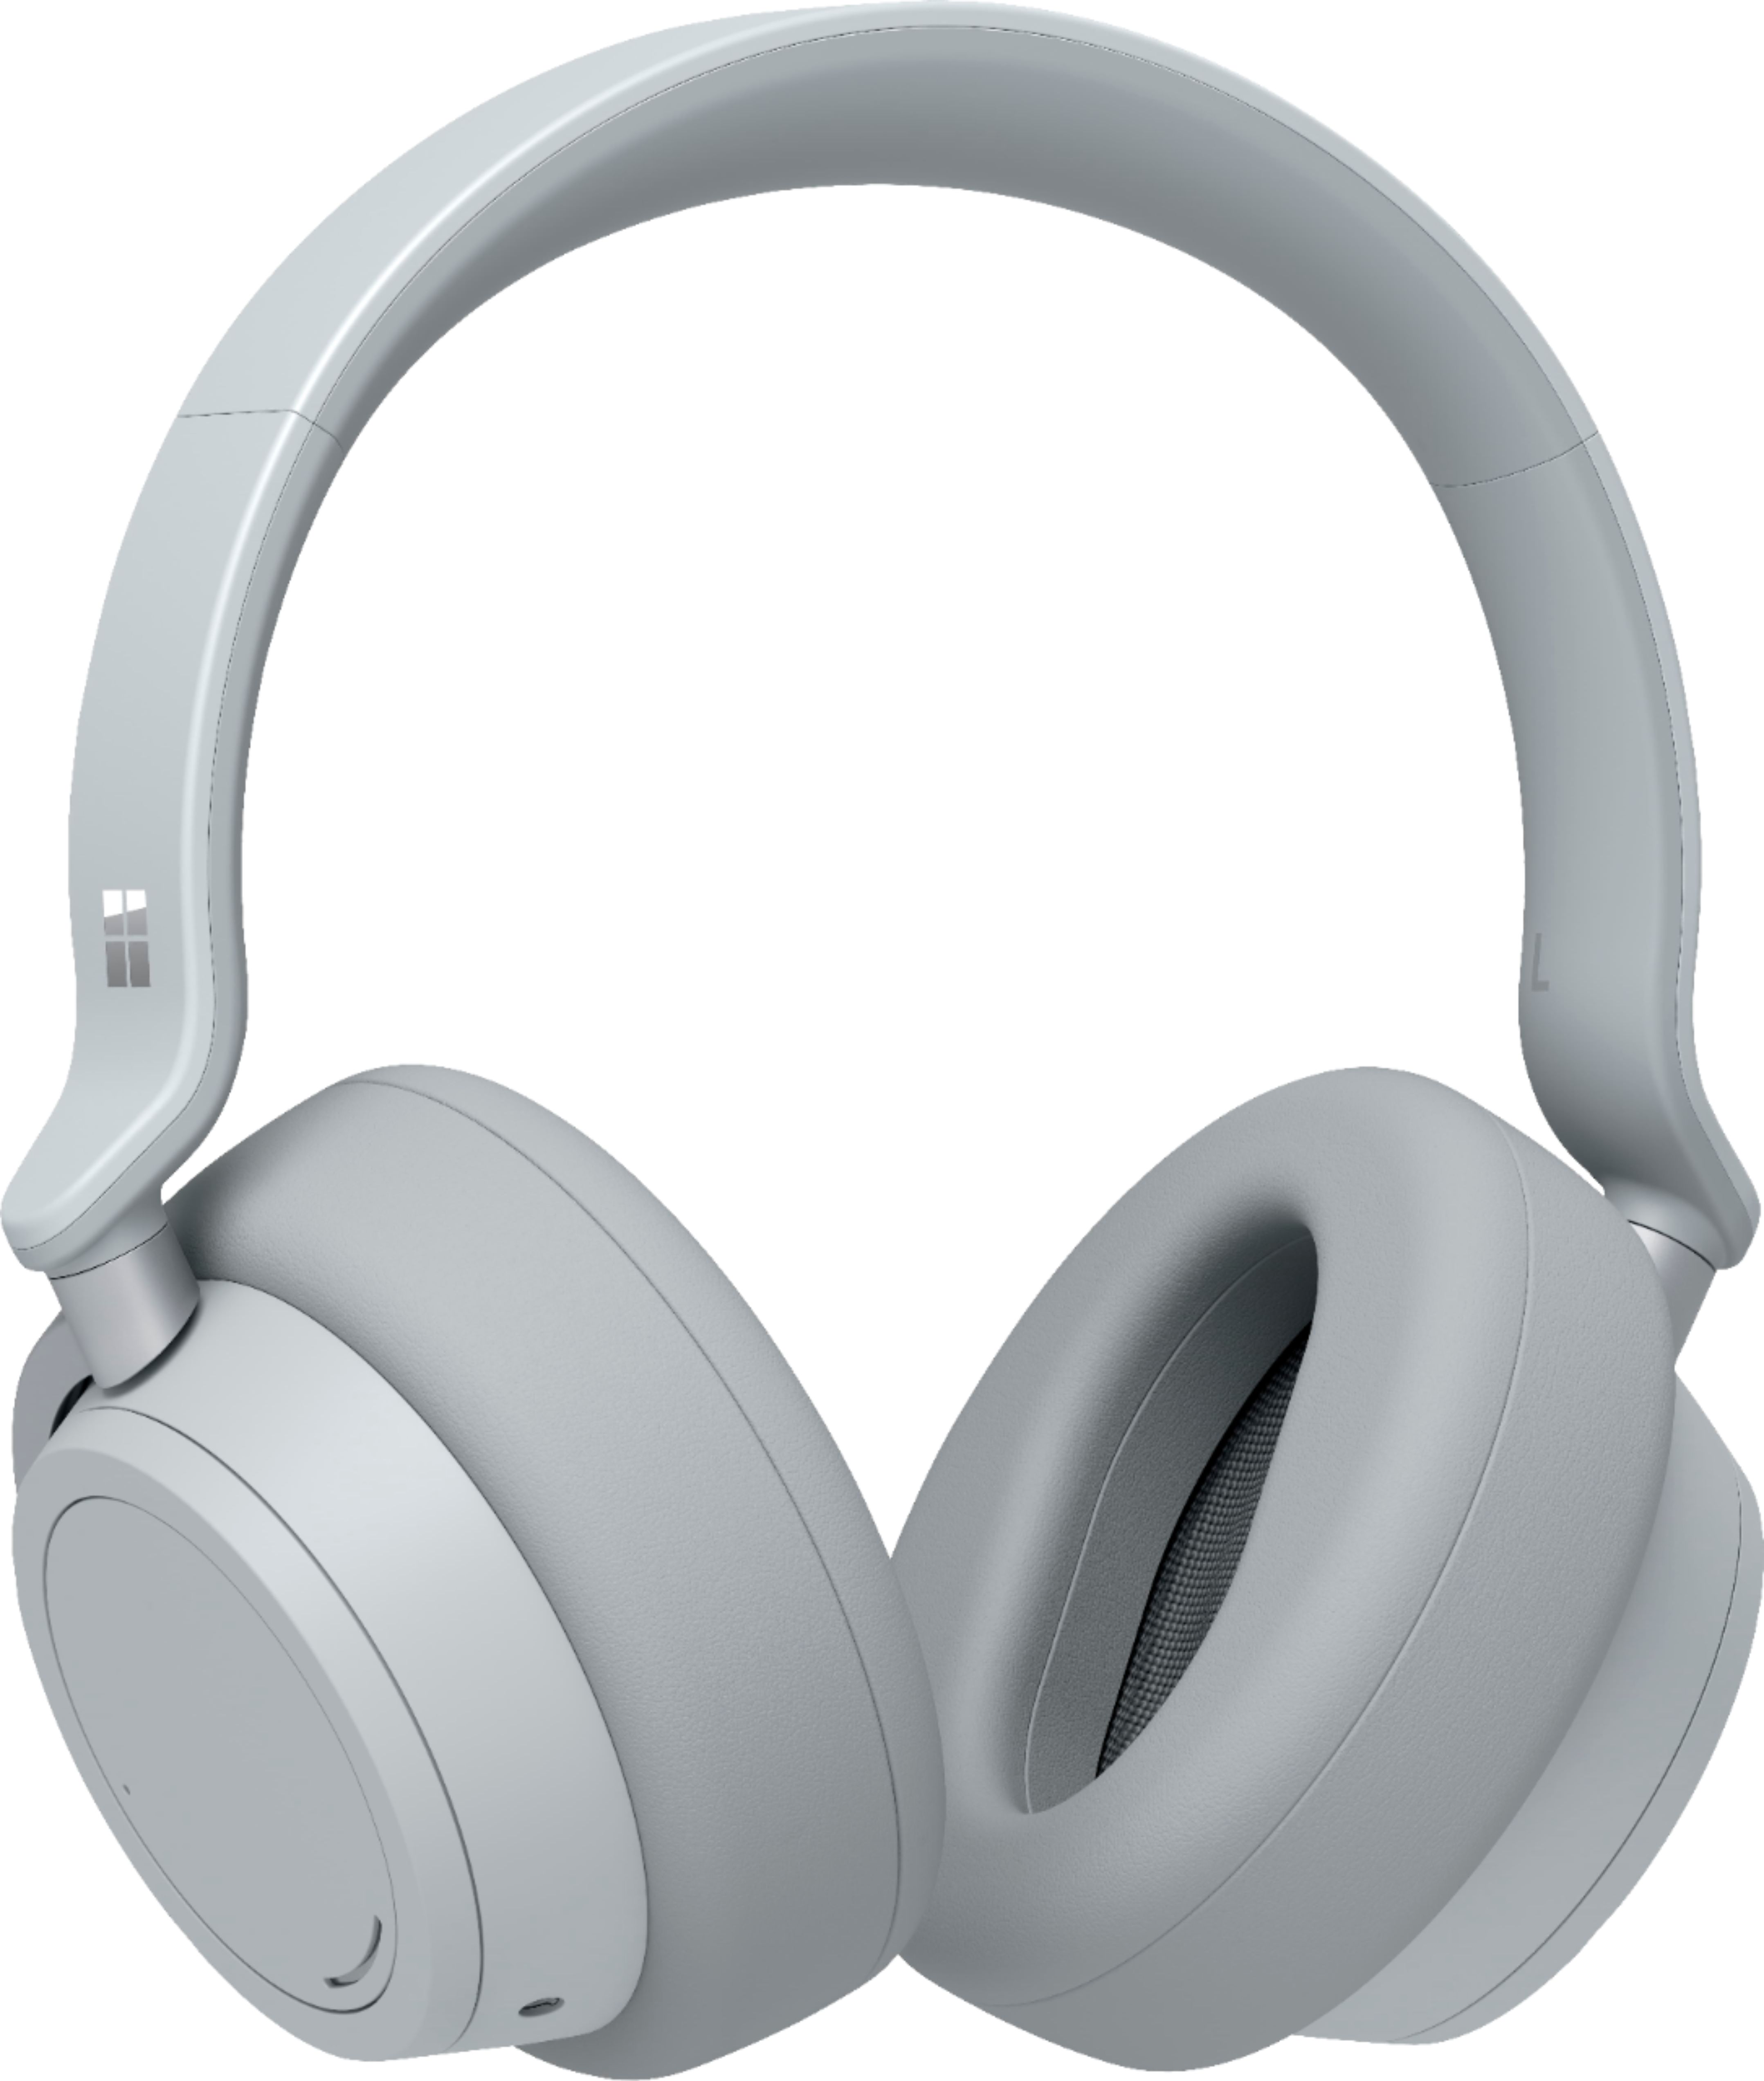 Angle View: Microsoft - Geek Squad Certified Refurbished Surface Headphones - Wireless Noise Cancelling Over-the-Ear with Cortana - Light Gray